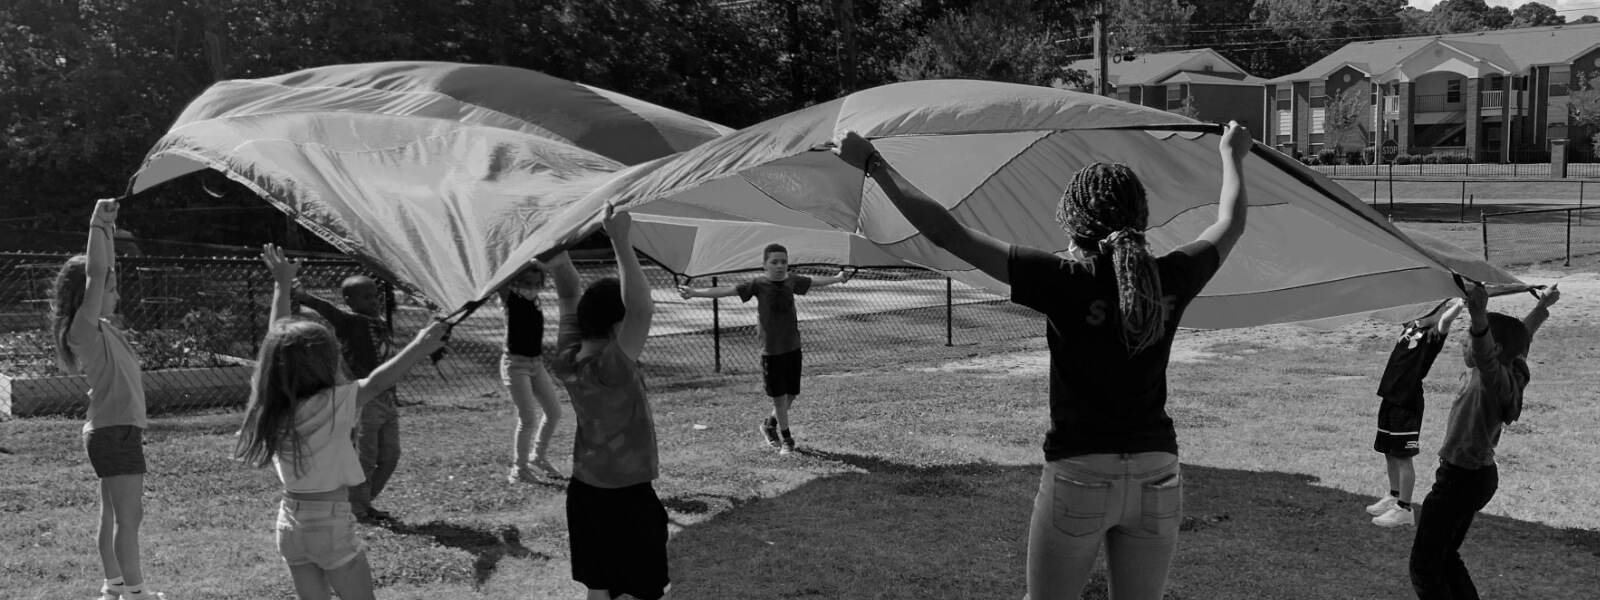 Volunteer plays parachute with a group of children.